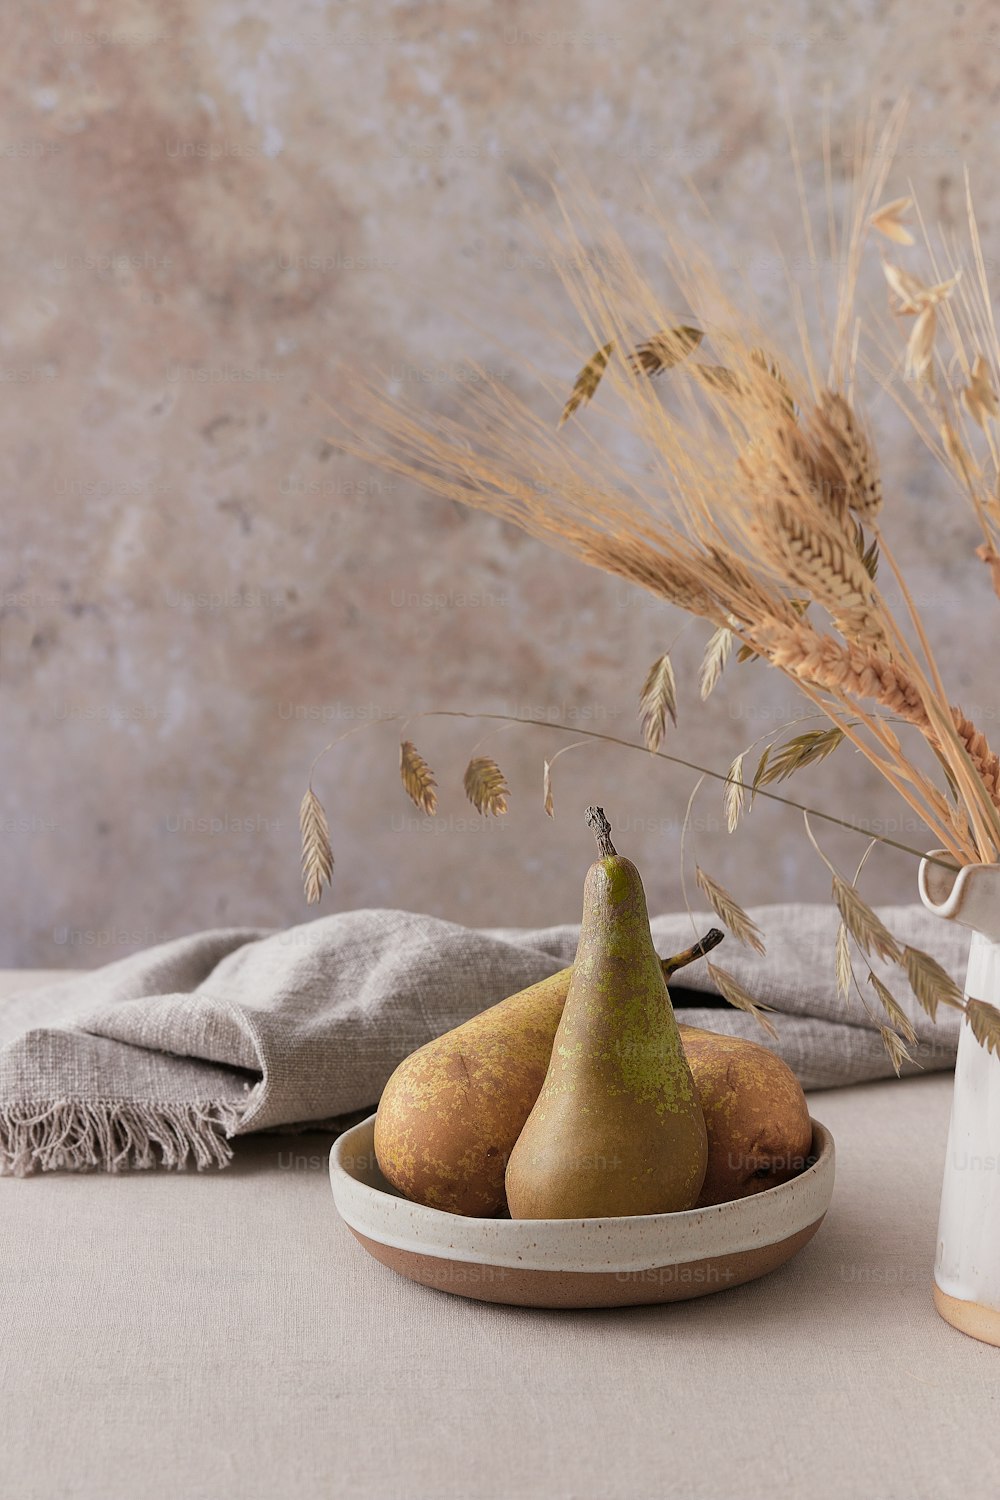 a bowl of pears and some wheat on a table